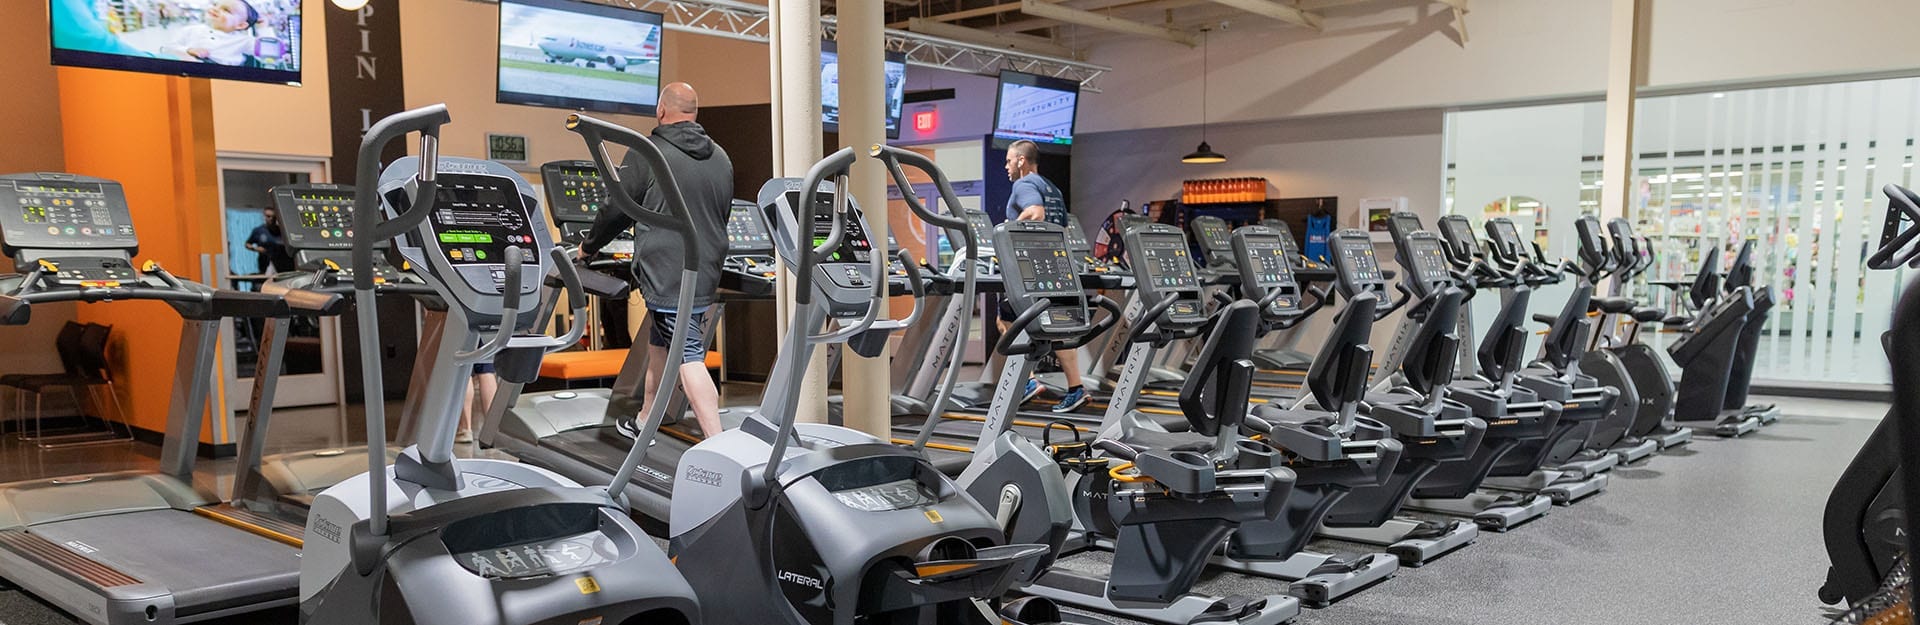 view of spacious cardio floor with exercise equipment